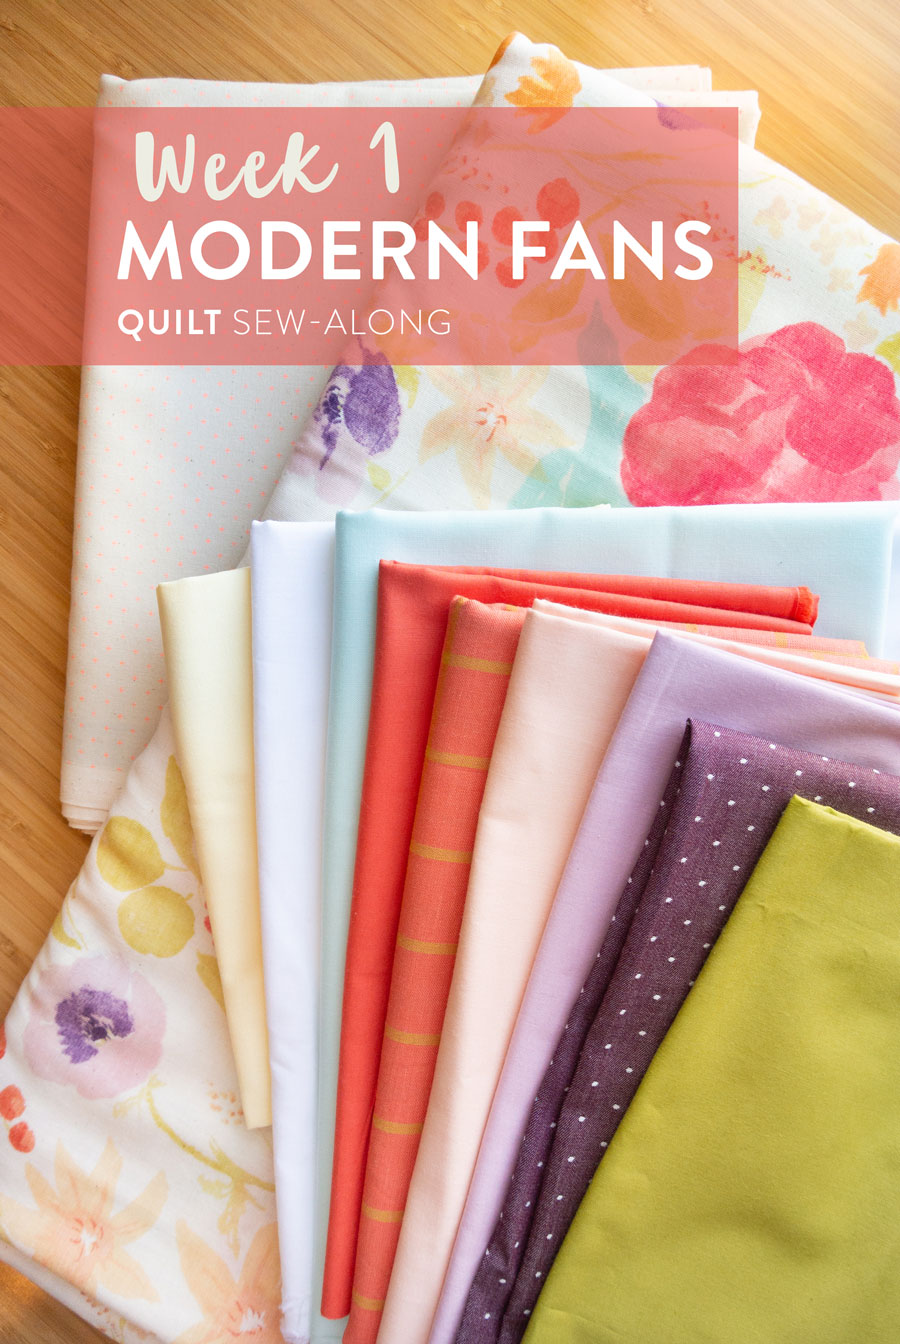 Join the Modern Fans quilt pattern sew-along for a chance to win a BERNINA 350 sewing machine along with other amazing prizes! | Suzy Quilts https://suzyquilts.com/modern-fans-quilt-sew-along-week-1